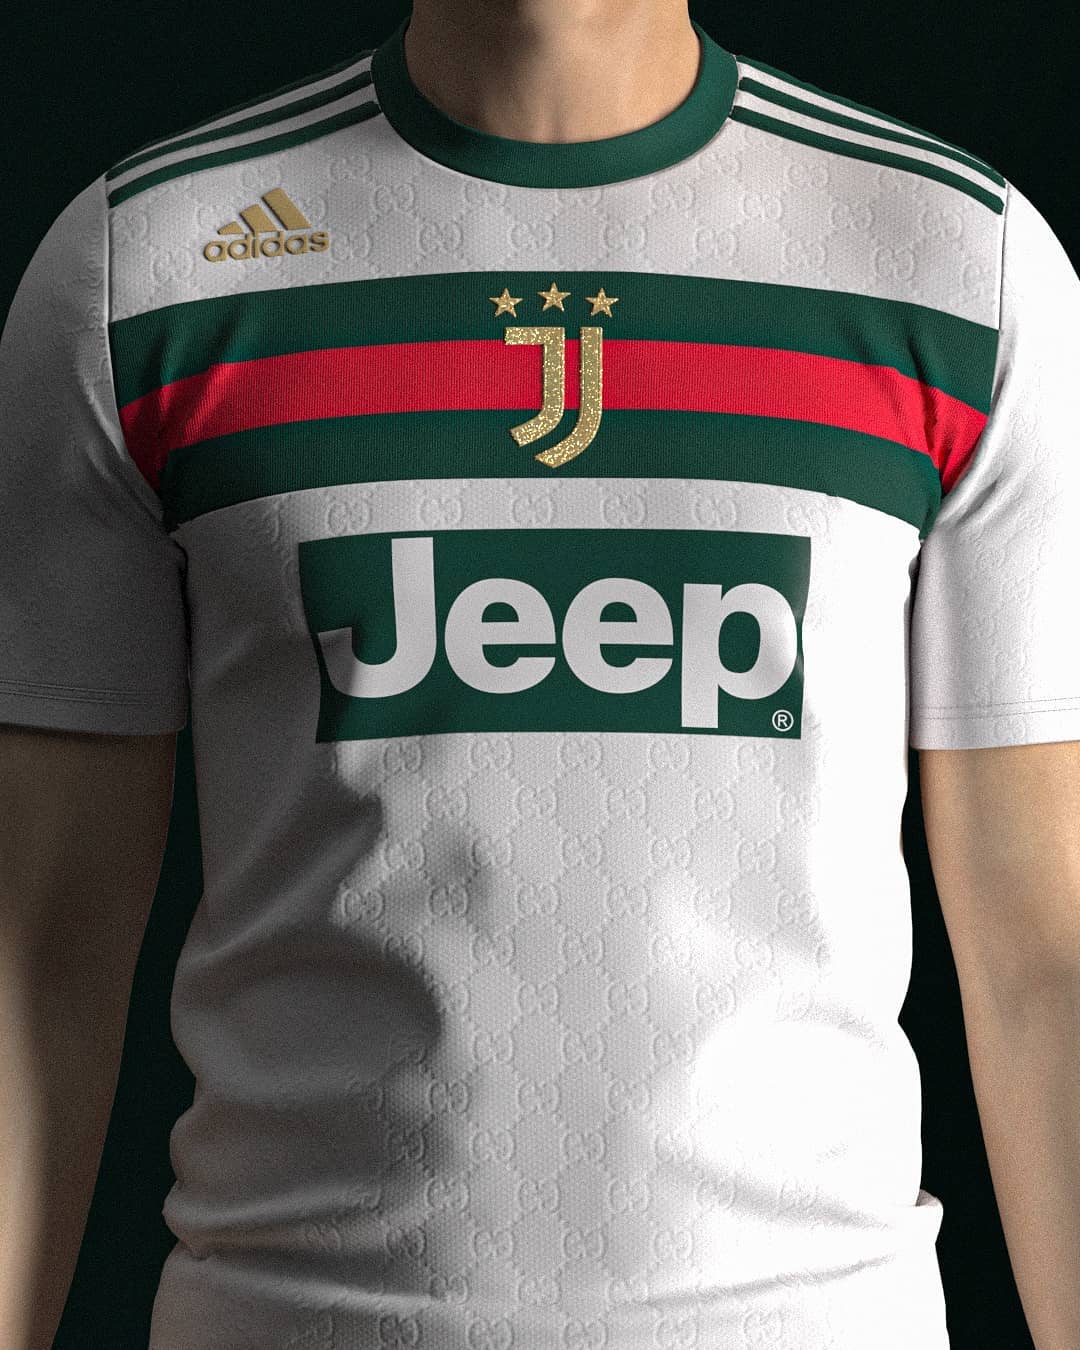 Adidas Juventus x Gucci Concept Kit By SETTPACE - Footy Headlines